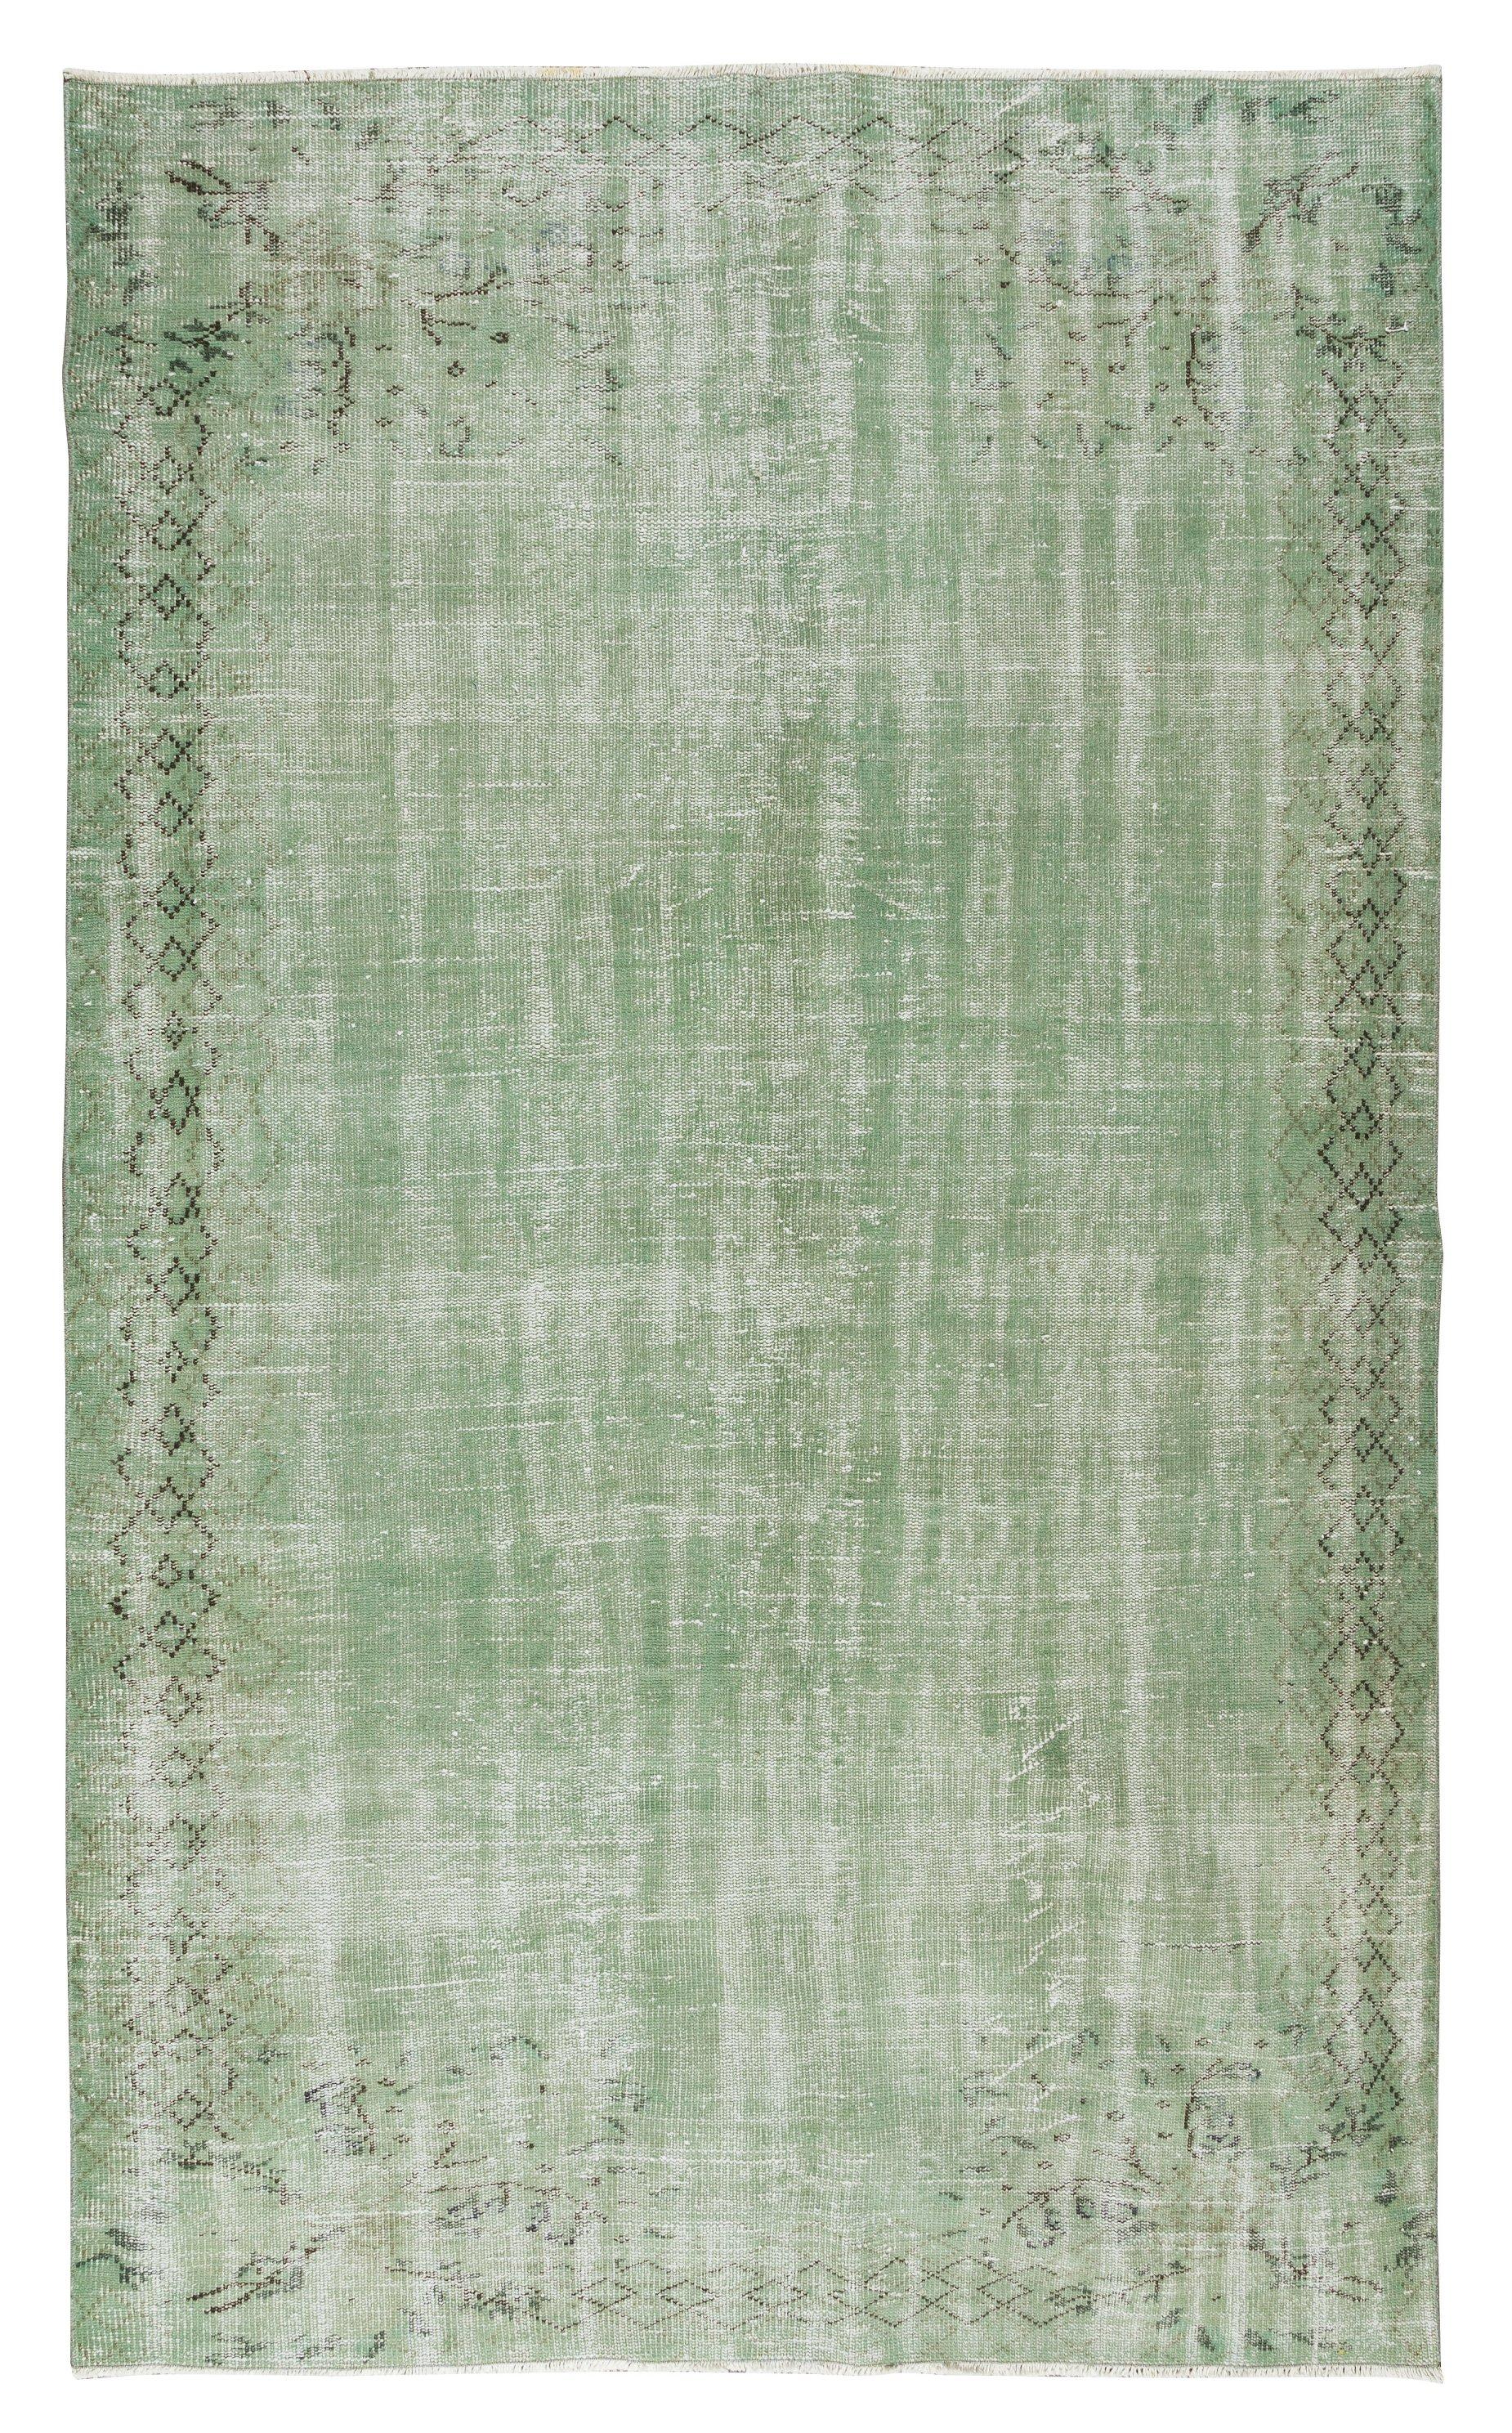 5.6x9 Ft Handmade Central Anatolian Vintage Area Rug Over-Dyed in Light Green